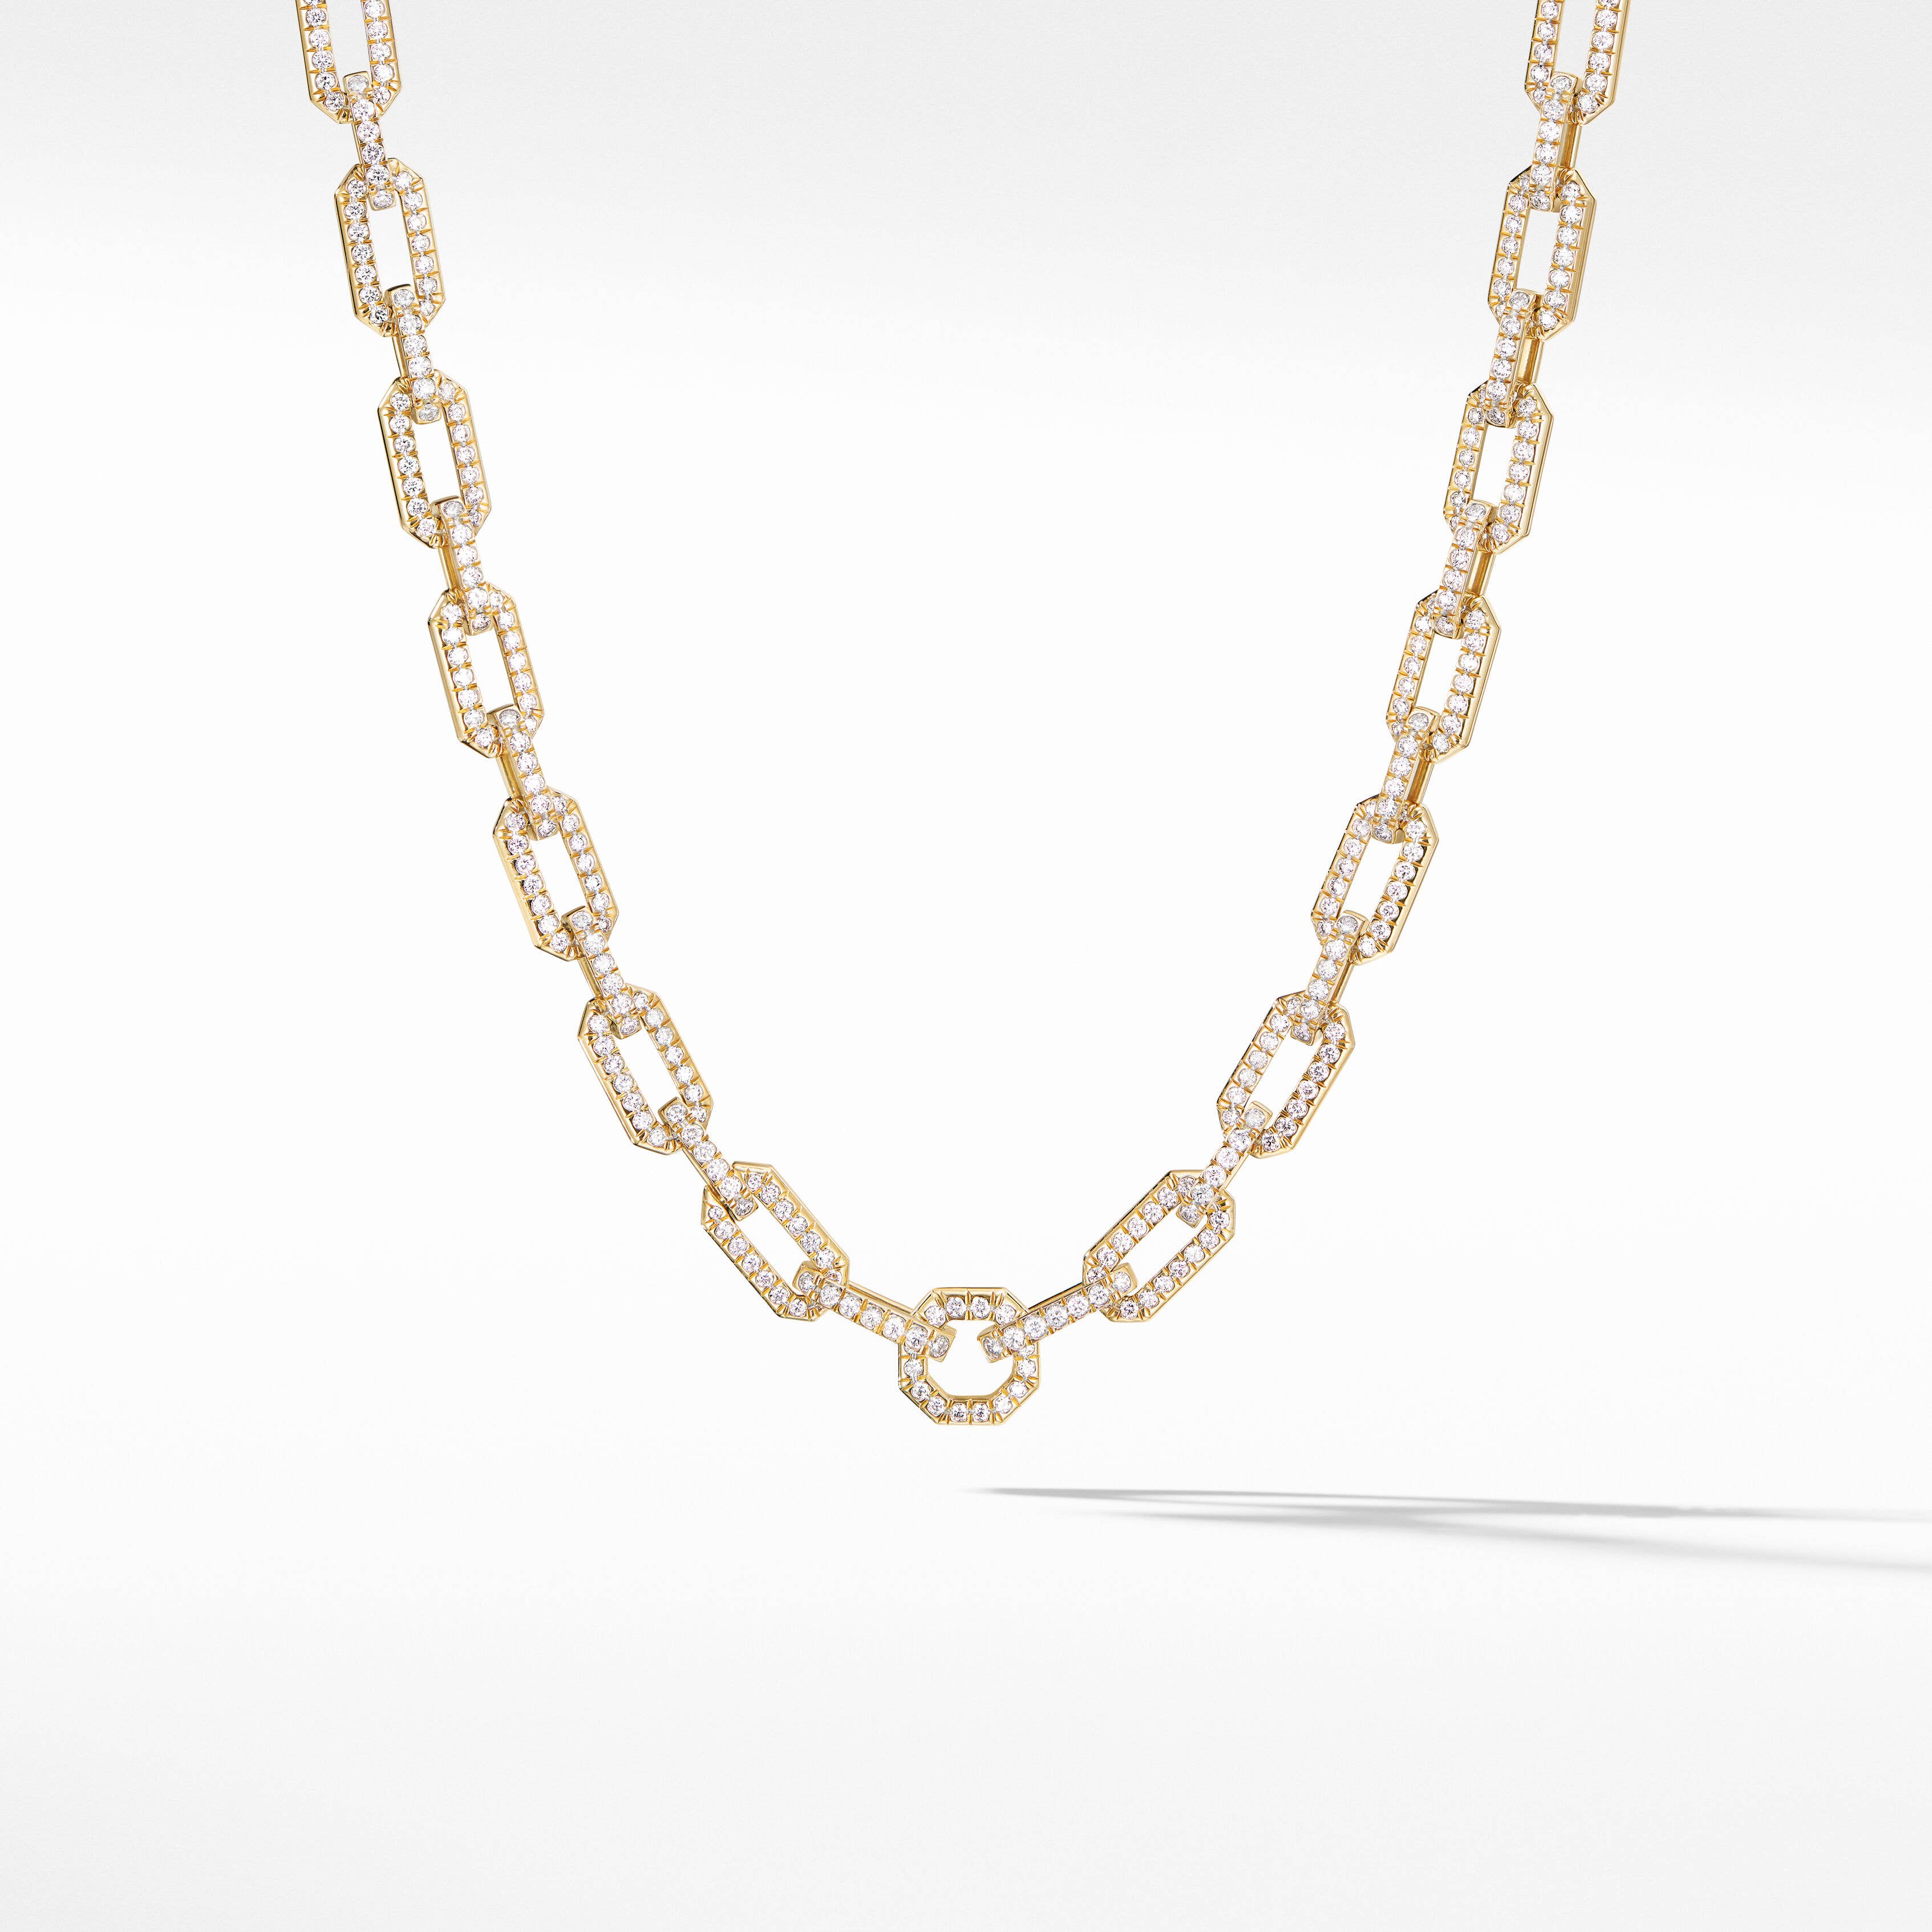 Pavé Chain Necklace in 18K Yellow Gold with Diamonds